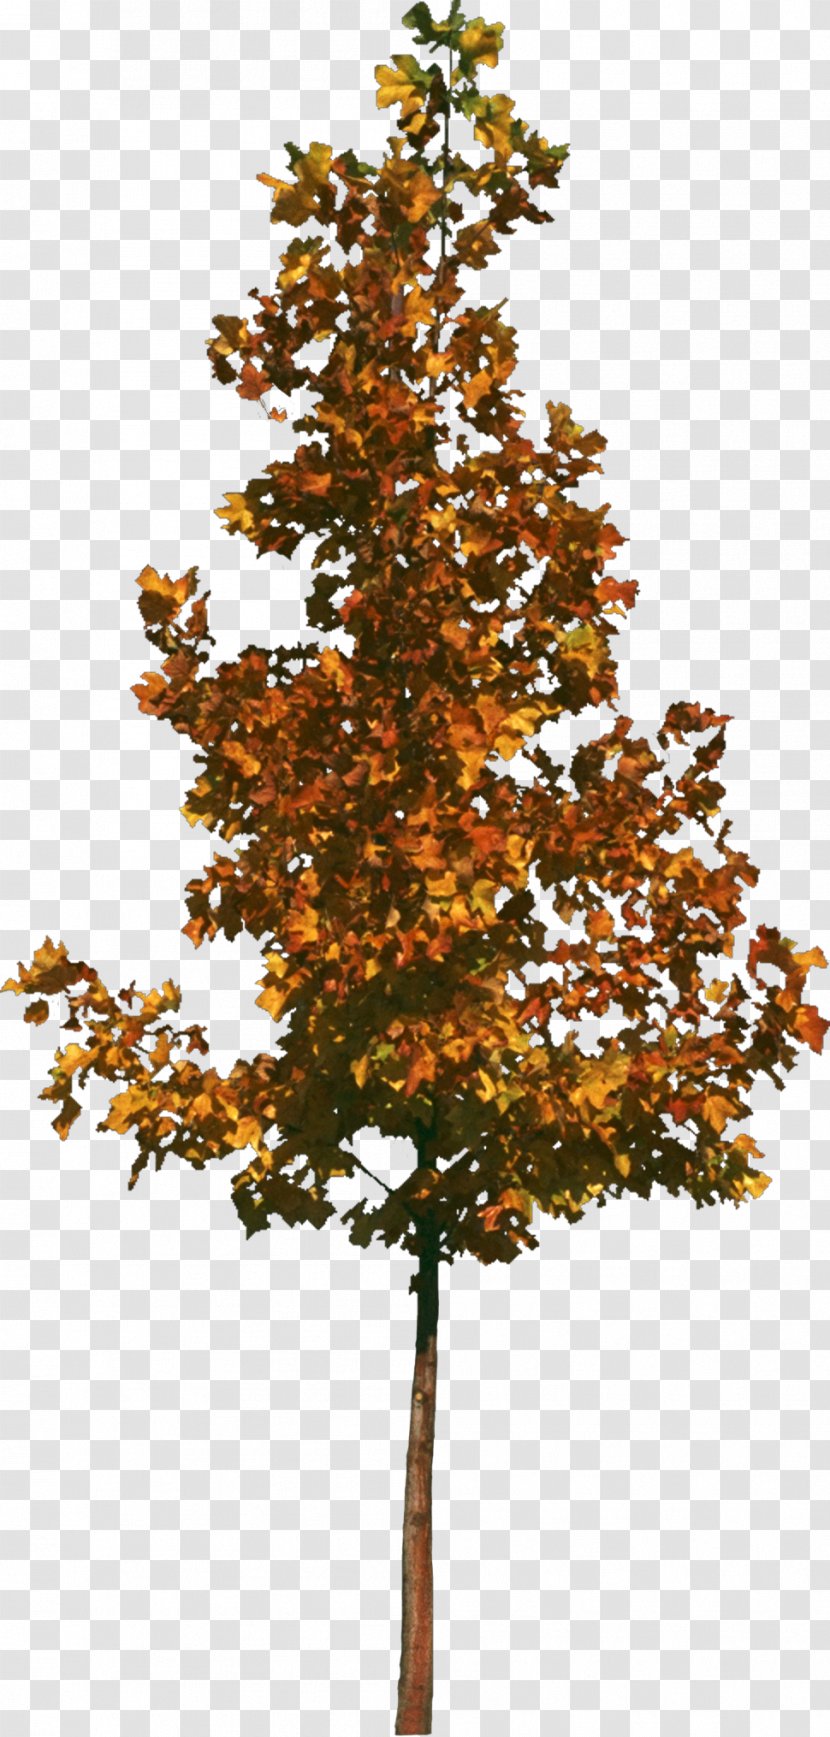 Tree Texture Mapping 3D Computer Graphics - Photography - Bushes Transparent PNG